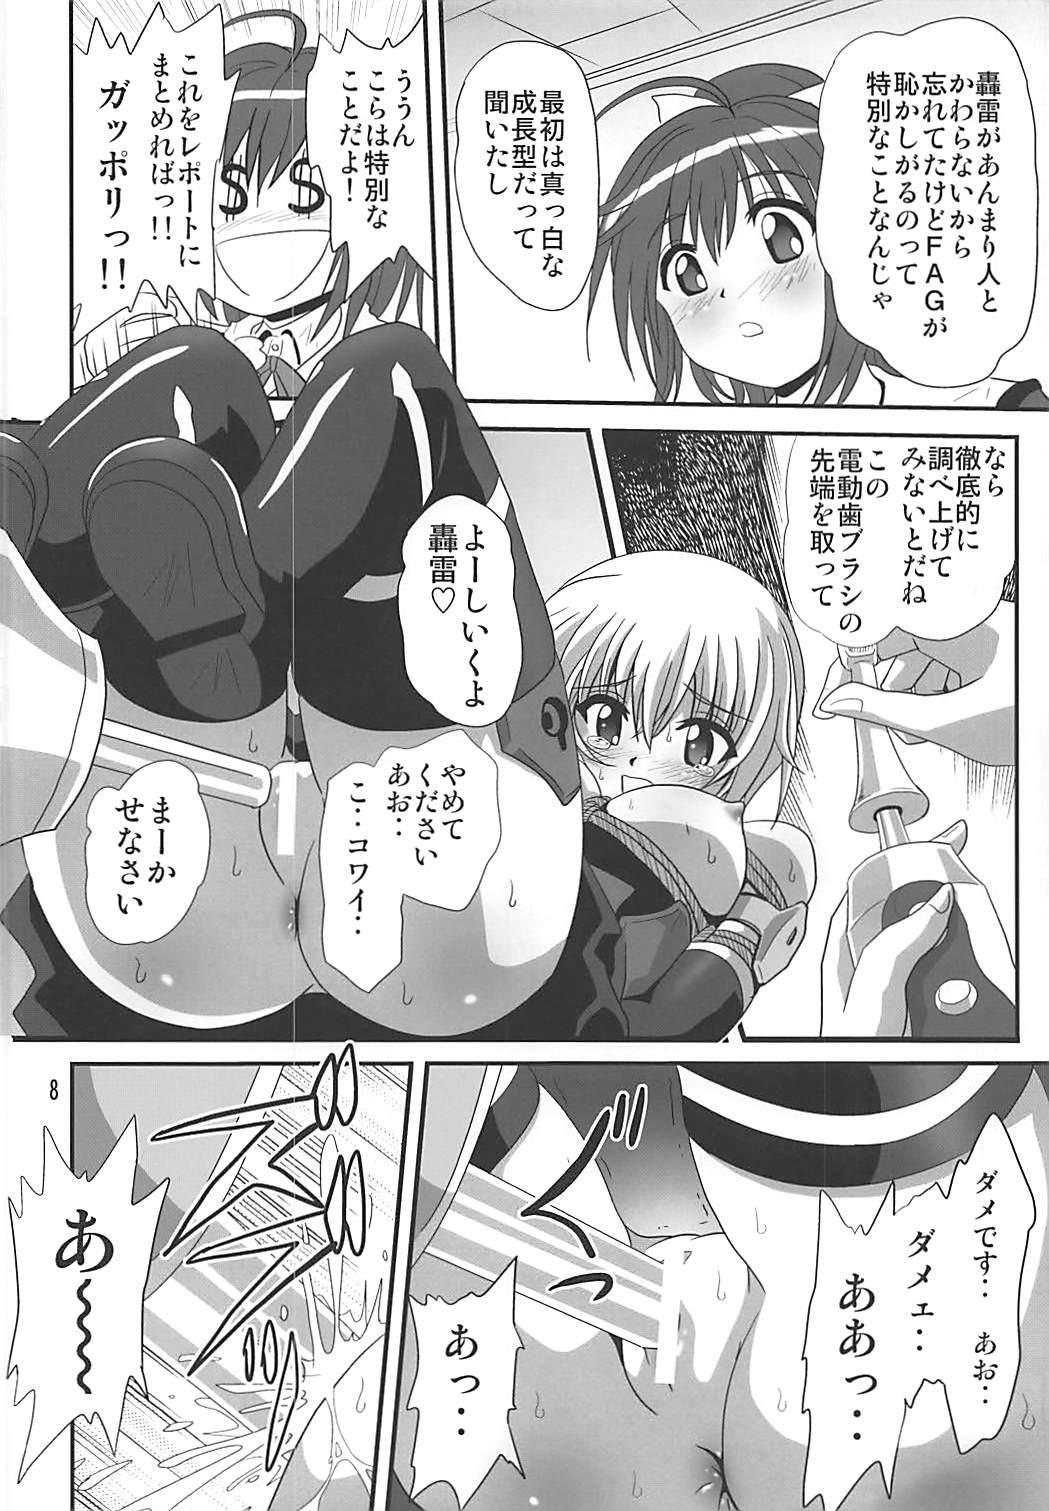 Longhair Bind Arms - Frame arms girl Short - Page 7